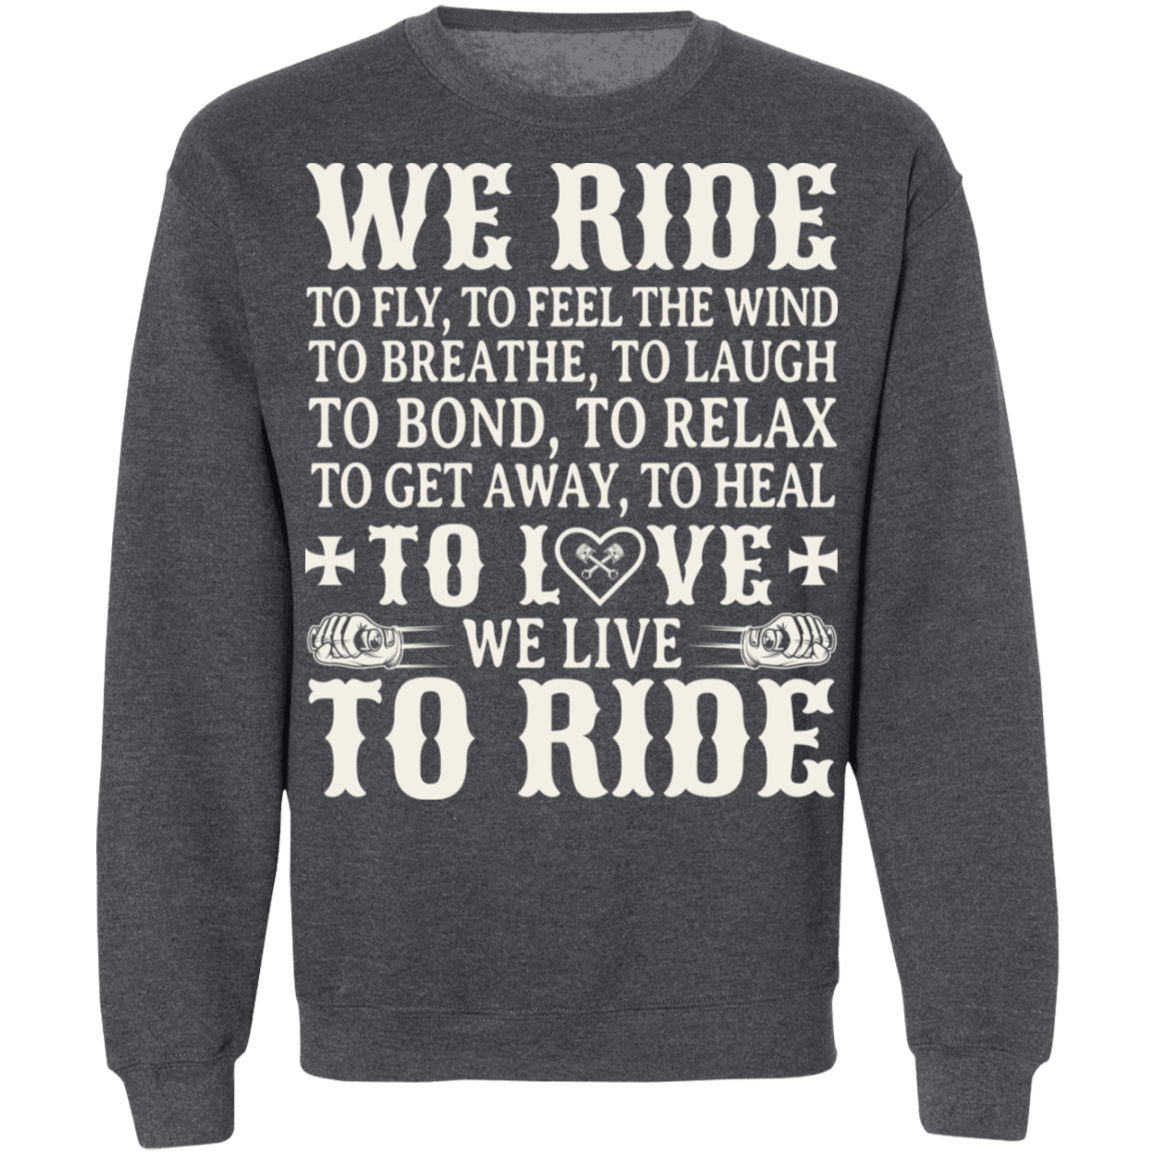 We ride. To fly, to feel the wind Shirt